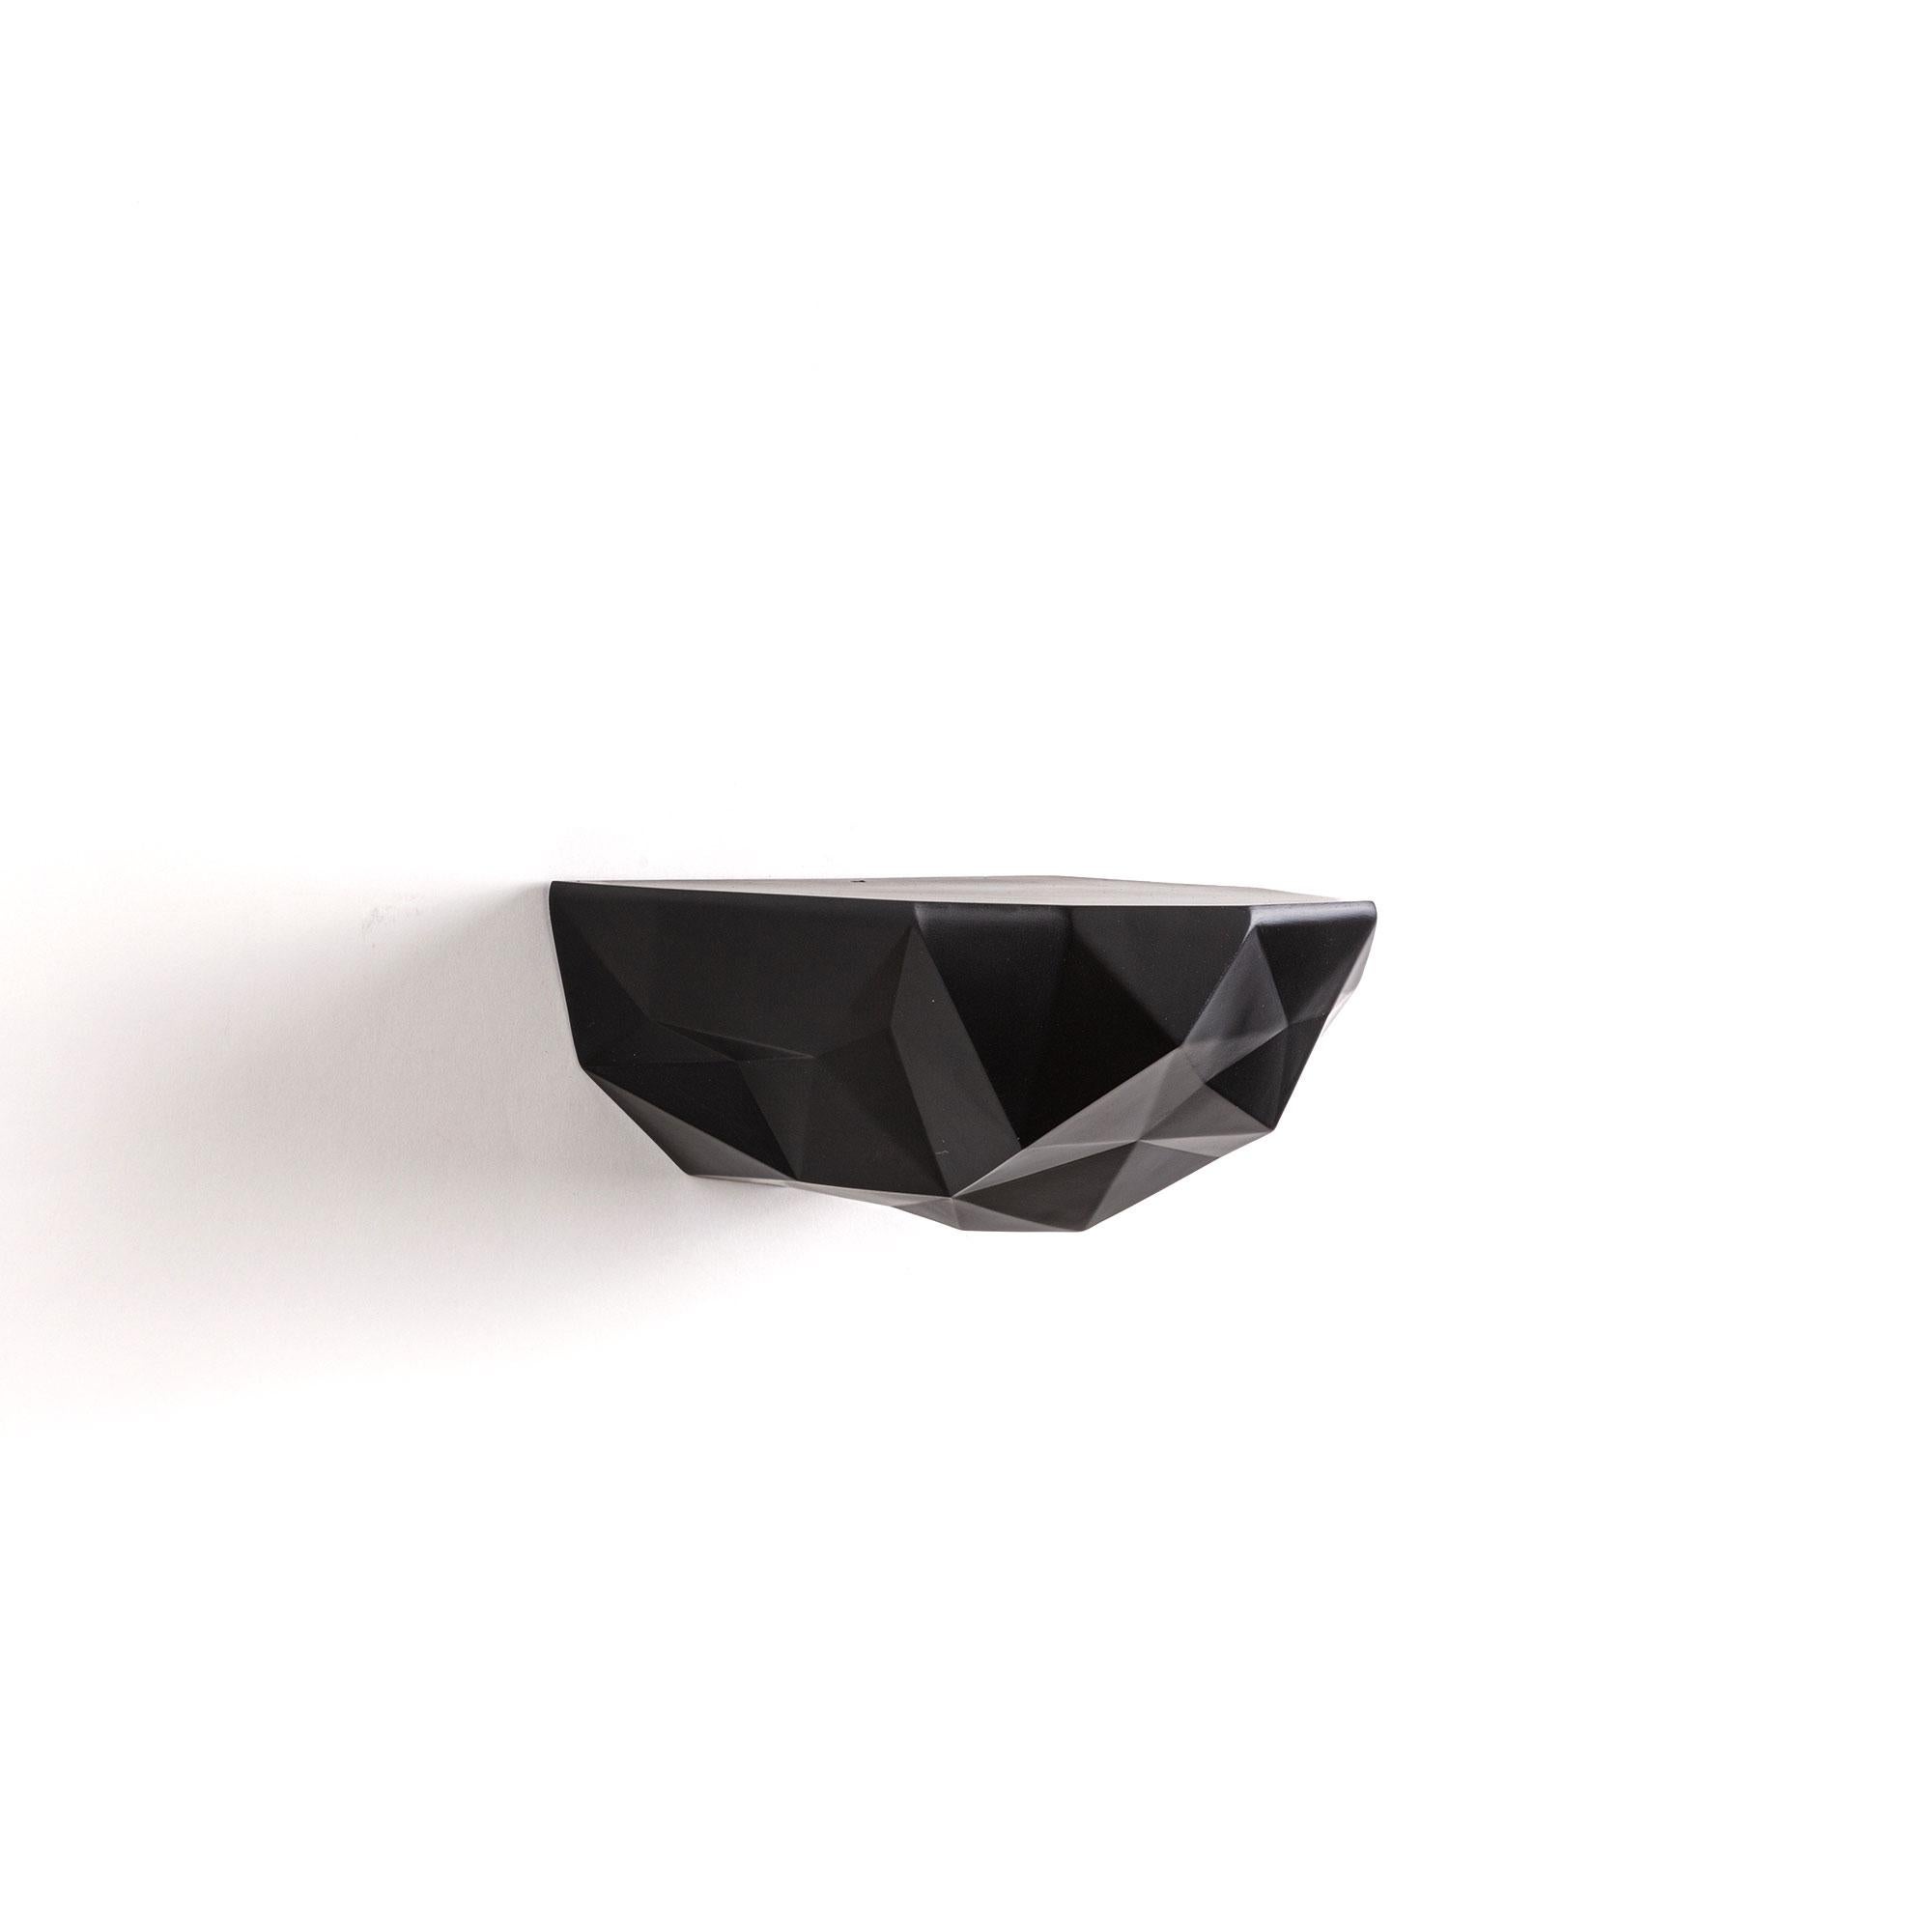 Chinese Space Rock Small black shelf For Sale